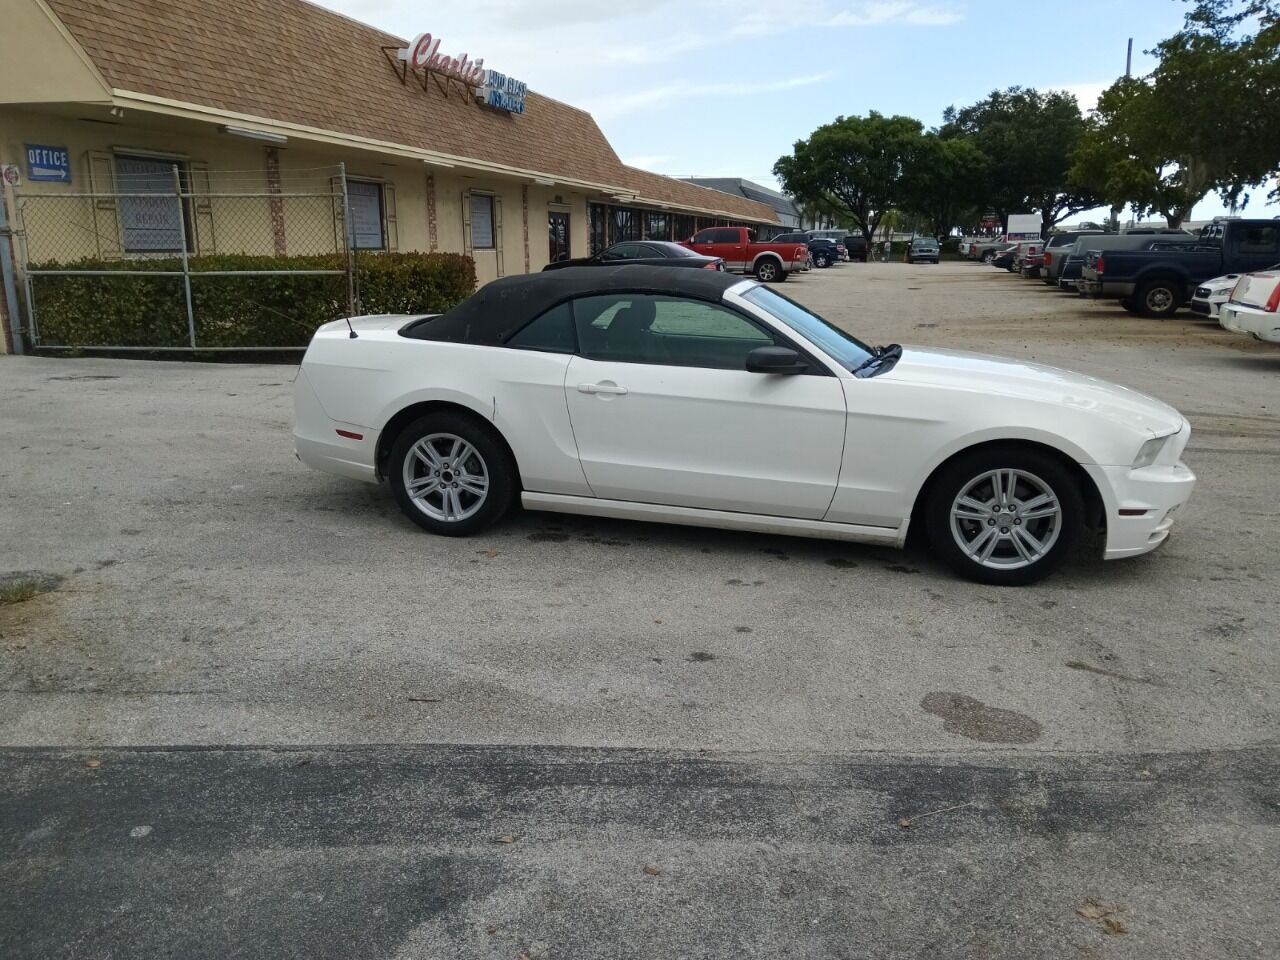 2013 FORD Mustang Convertible - $7,450